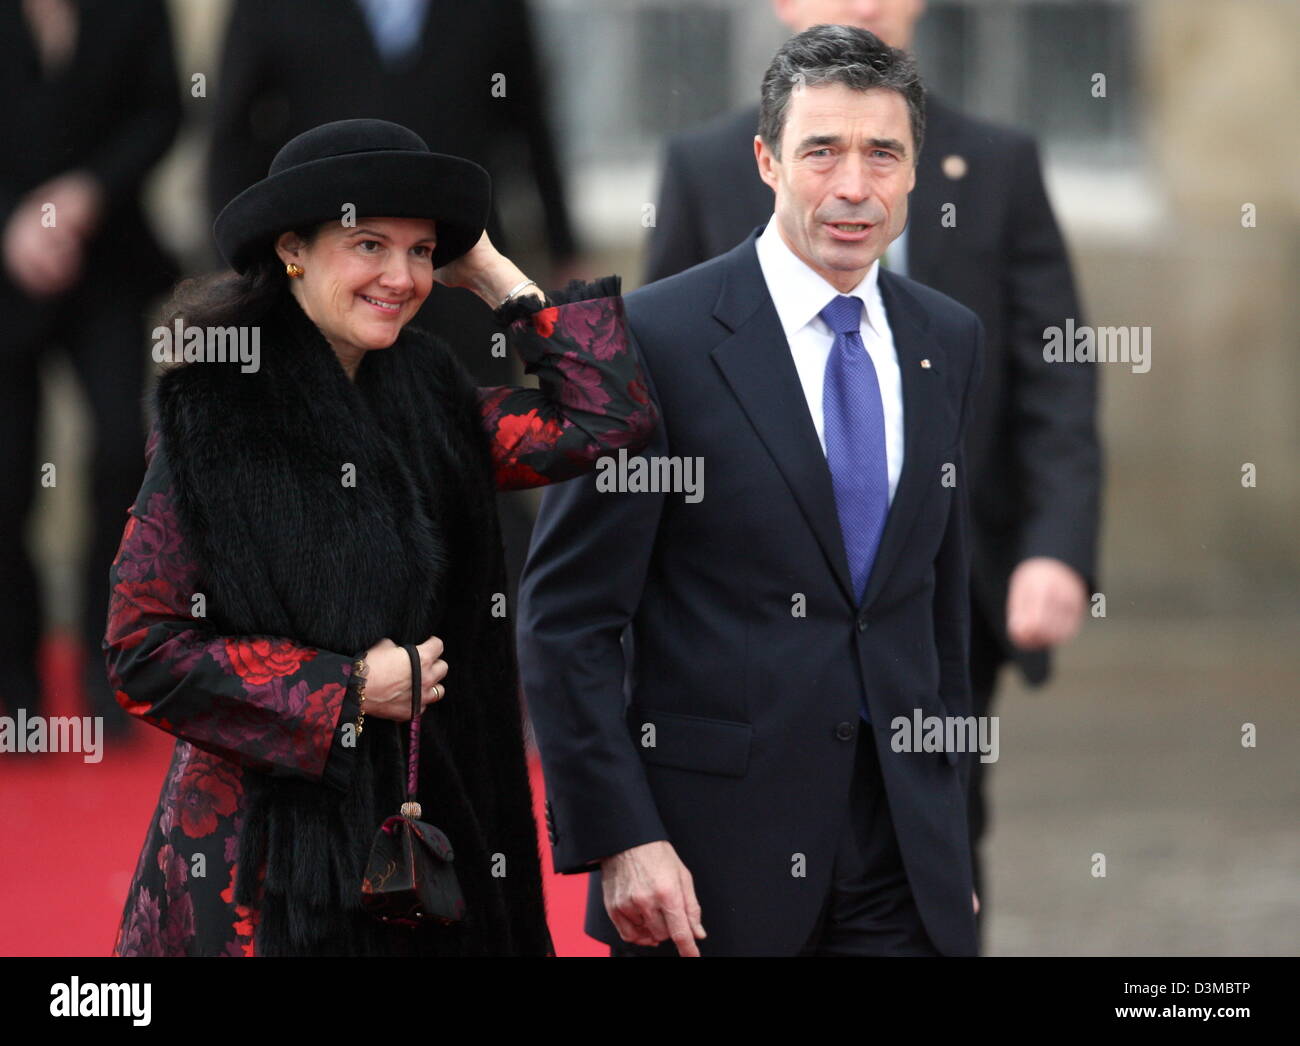 Anders Fogh Rasmussen, Pime Minister of Denmark (R), and his wife Anne-Mette arrive at the Castle Christiansborg chapel in Copenhagen, Denmark, 21 January 2006. The son of Crown Prince Frederik and Princess Mary of Denmark was christened in the church. The name of the baby born on 15 October 2005 was acquainted to the public at the baptism. He is baptised on the name Christian Vald Stock Photo